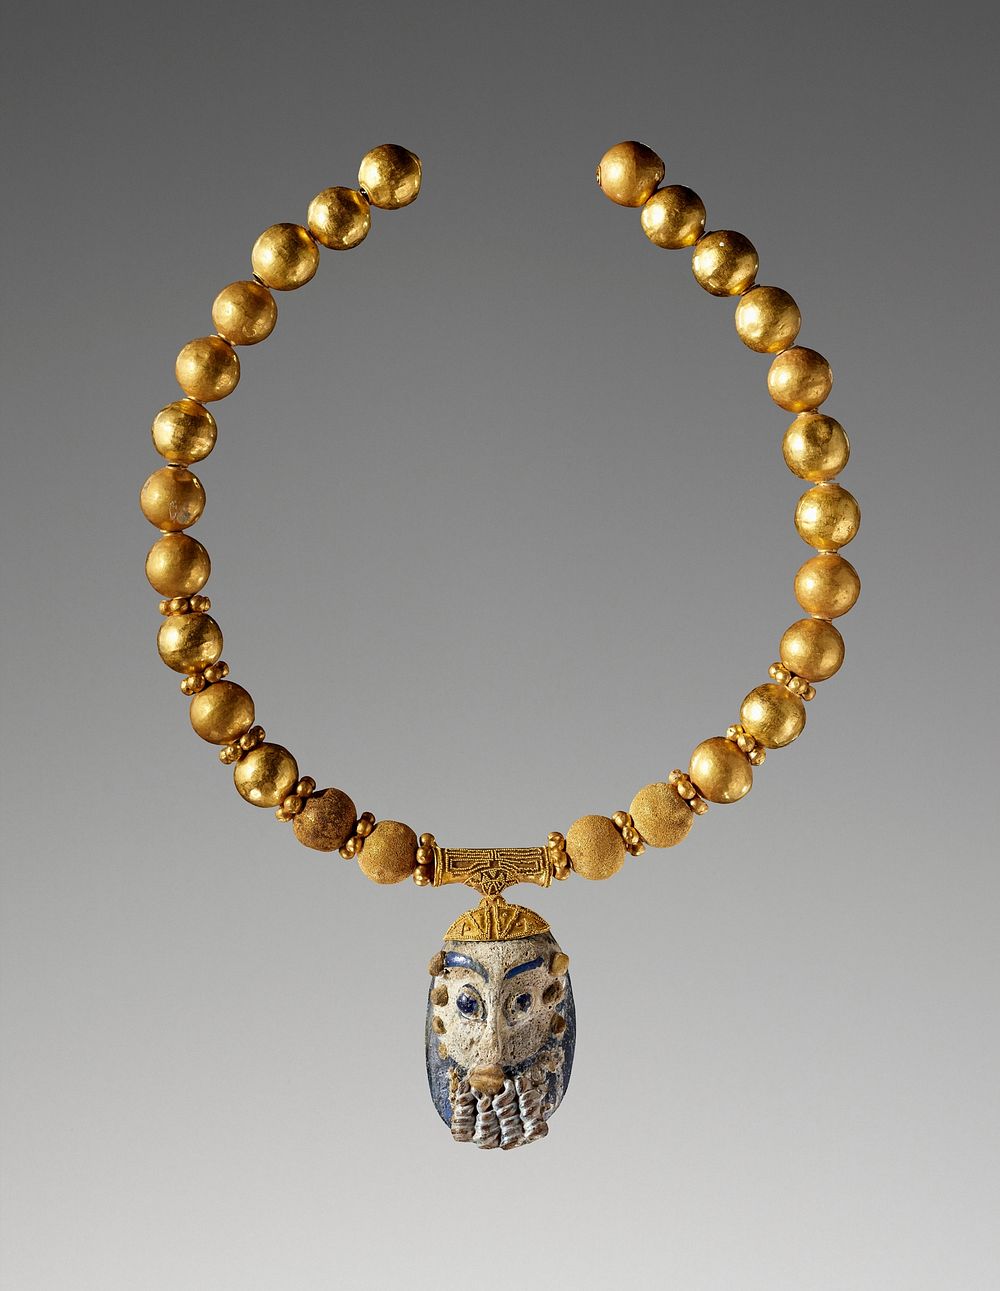 Necklace with a Bearded Head Pendant